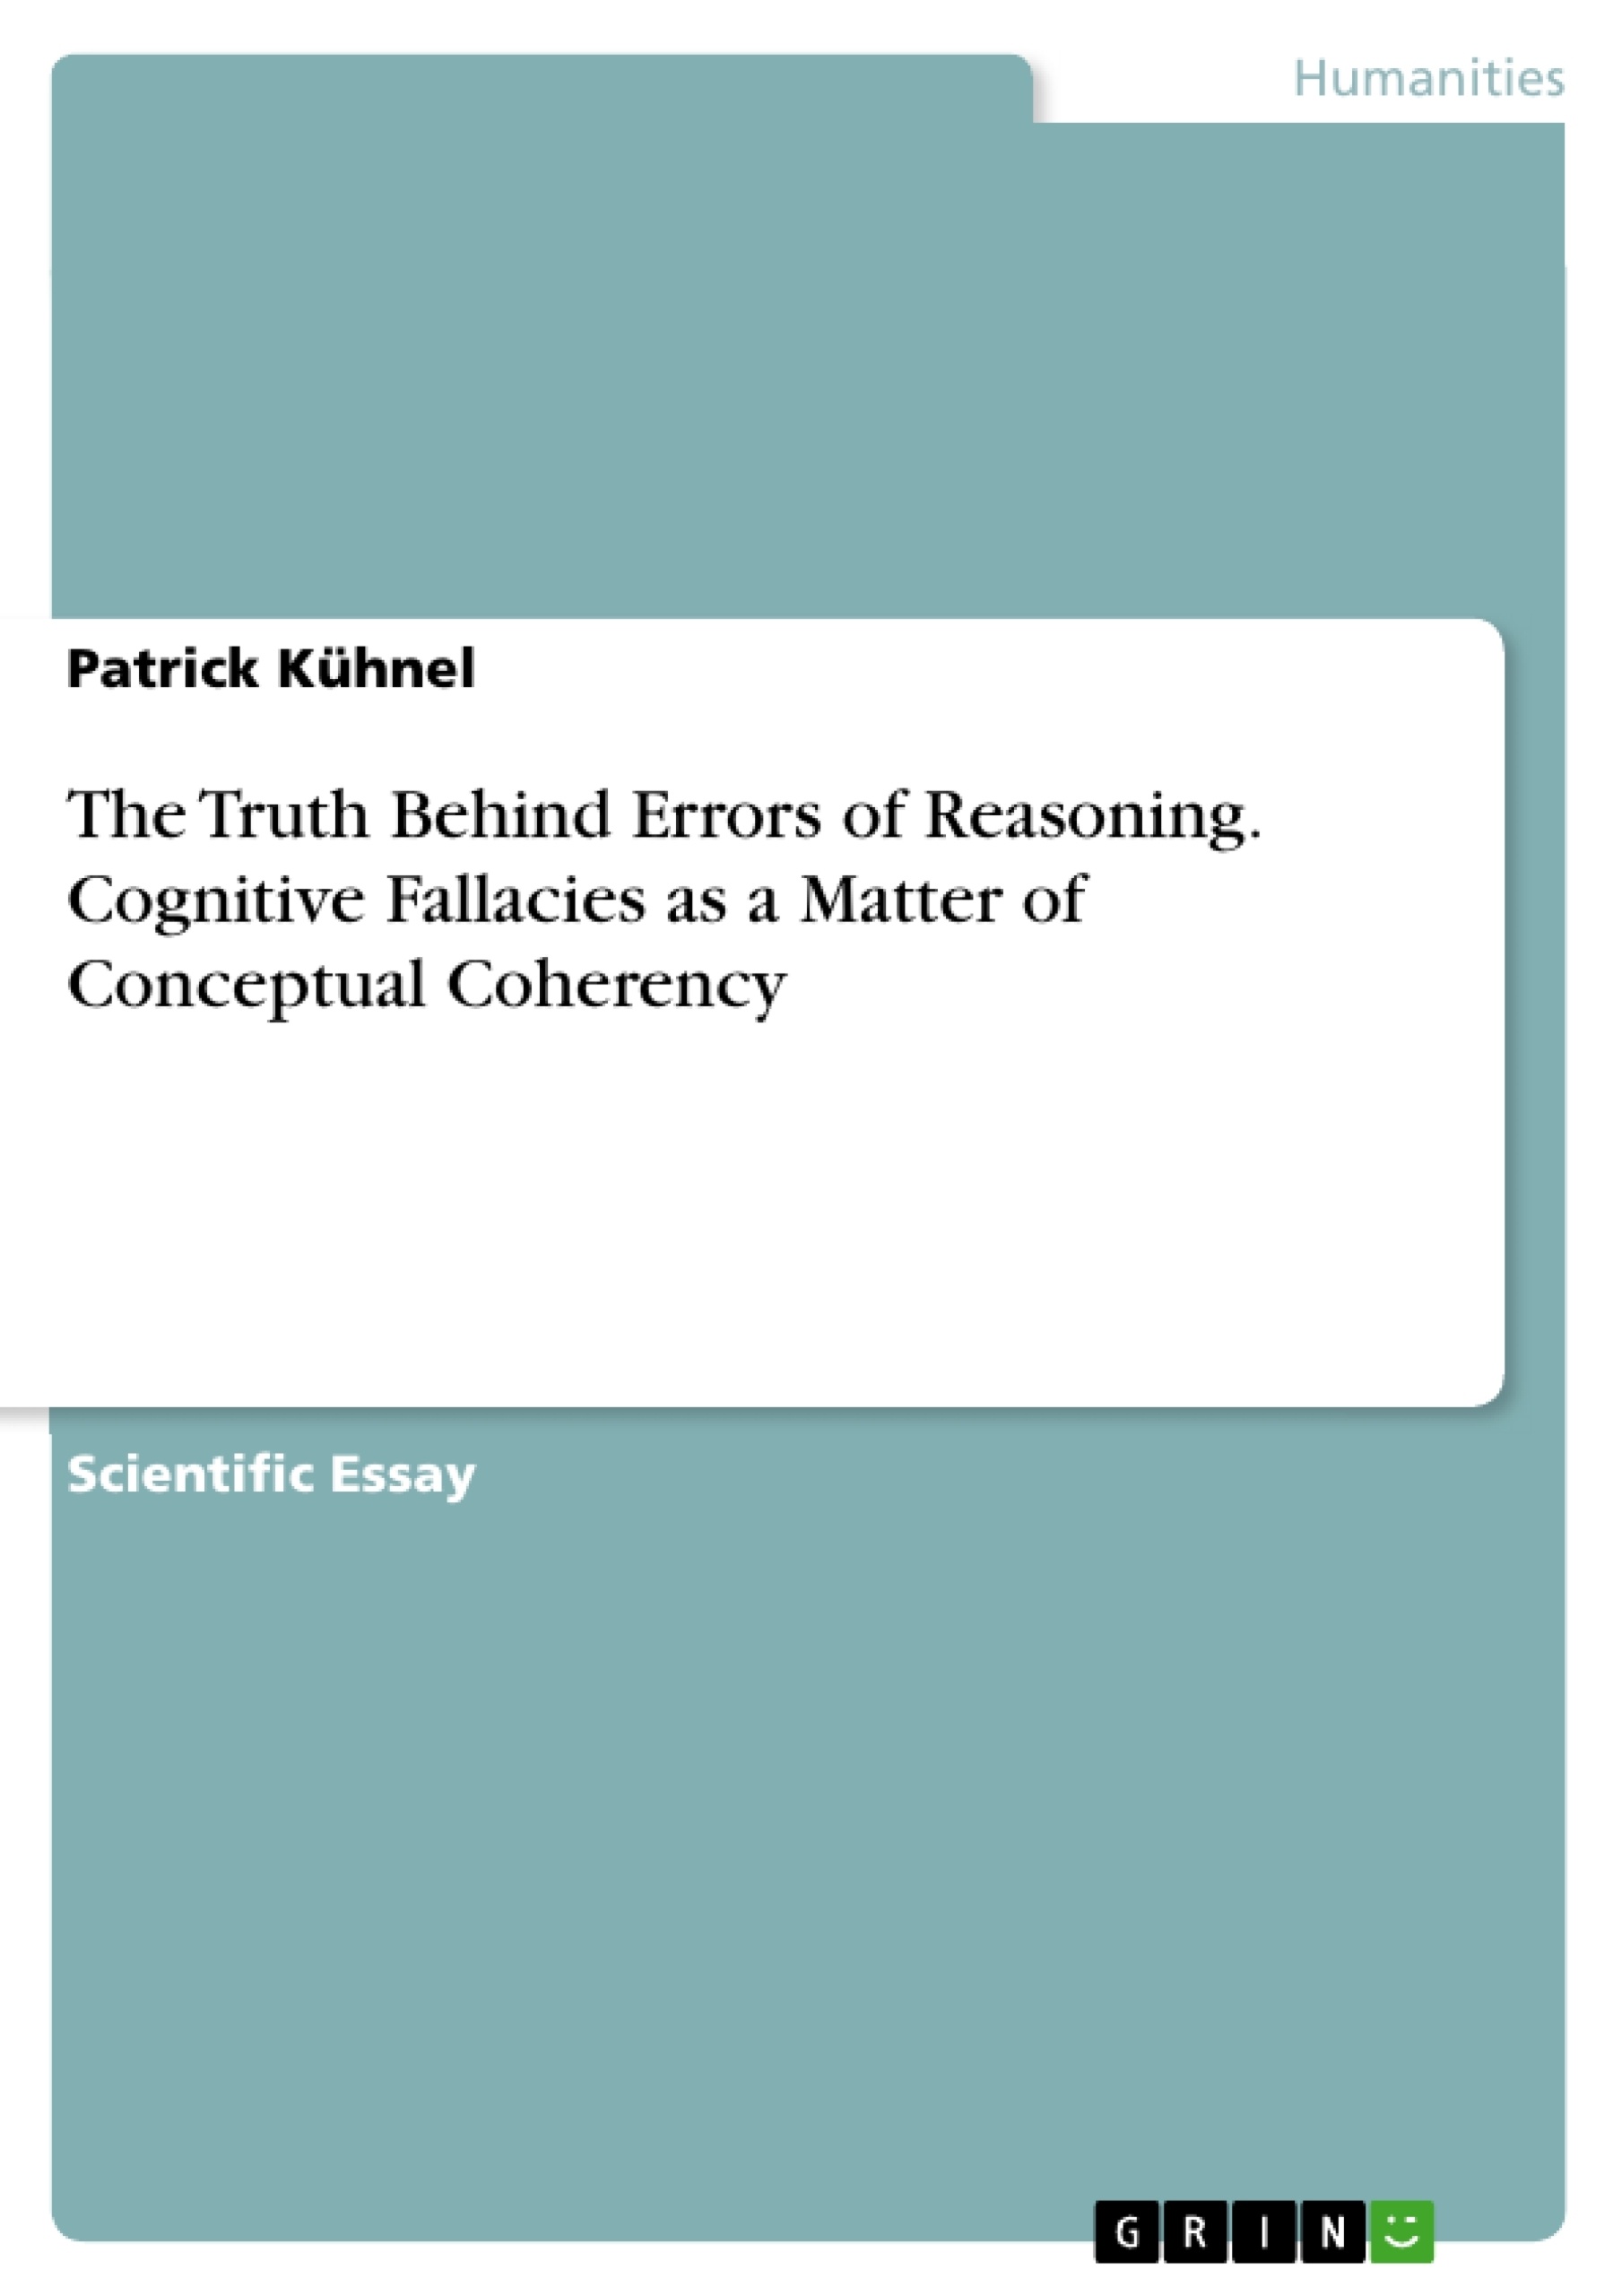 Título: The Truth Behind Errors of Reasoning. Cognitive Fallacies as a Matter of Conceptual Coherency